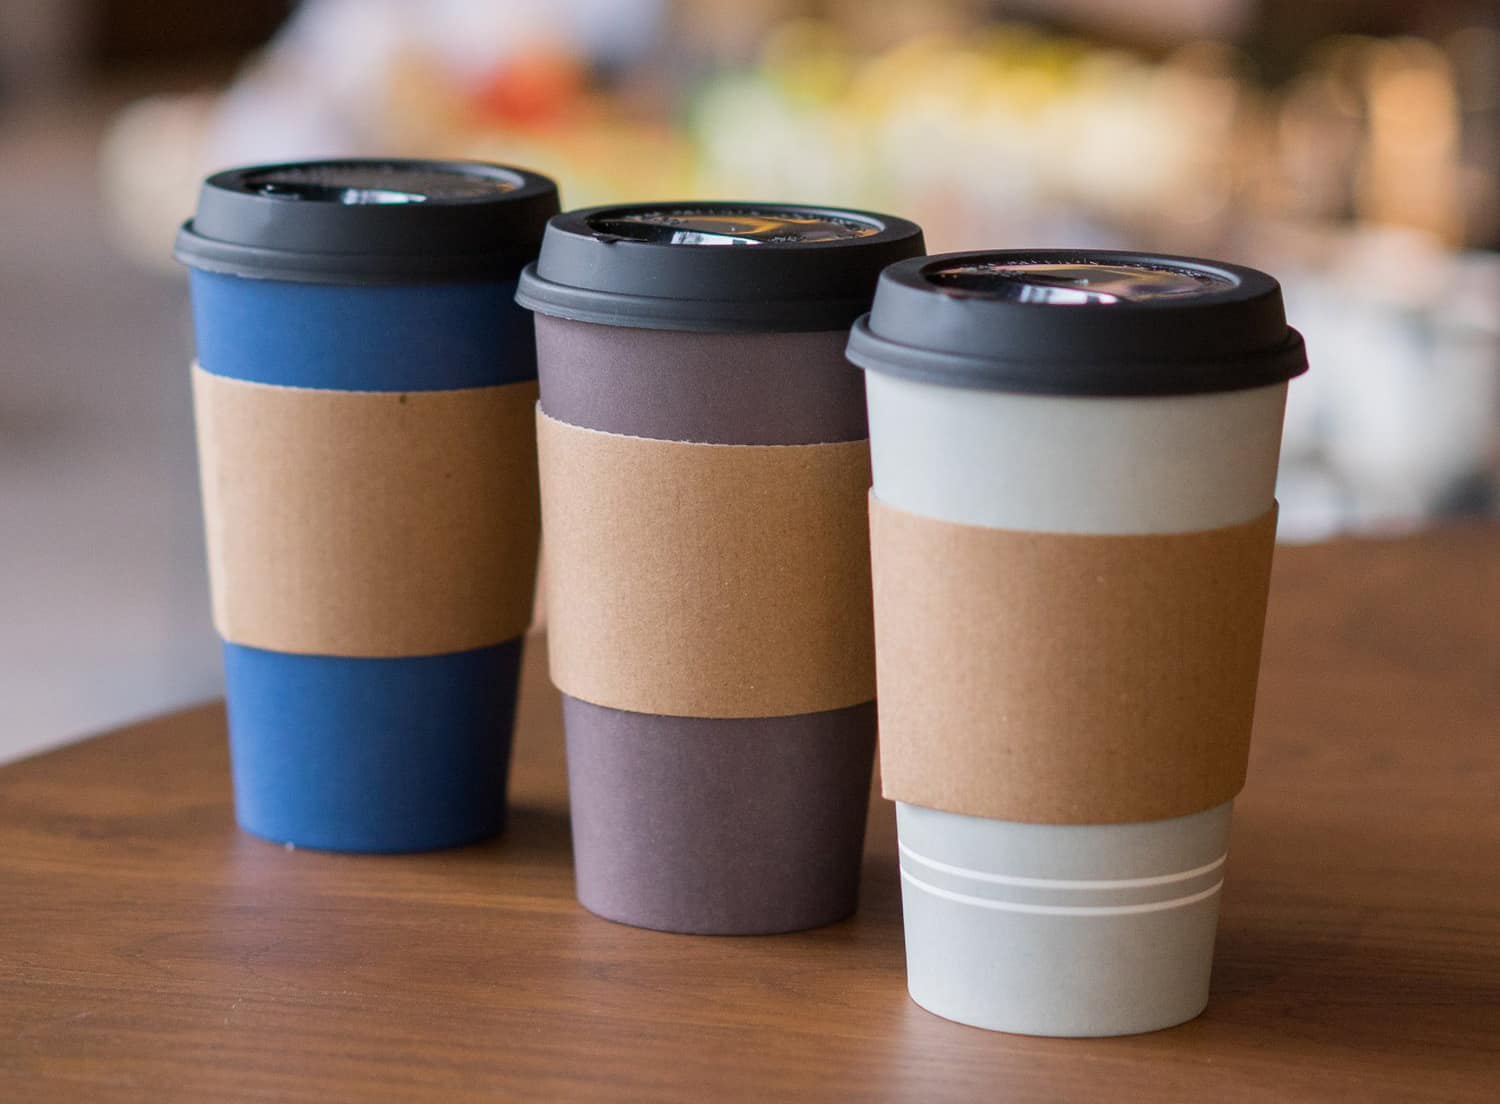 5 Cool Custom Coffee Sleeve Designs That You Should Try! Plastic coffee glass with paperboard sleeve